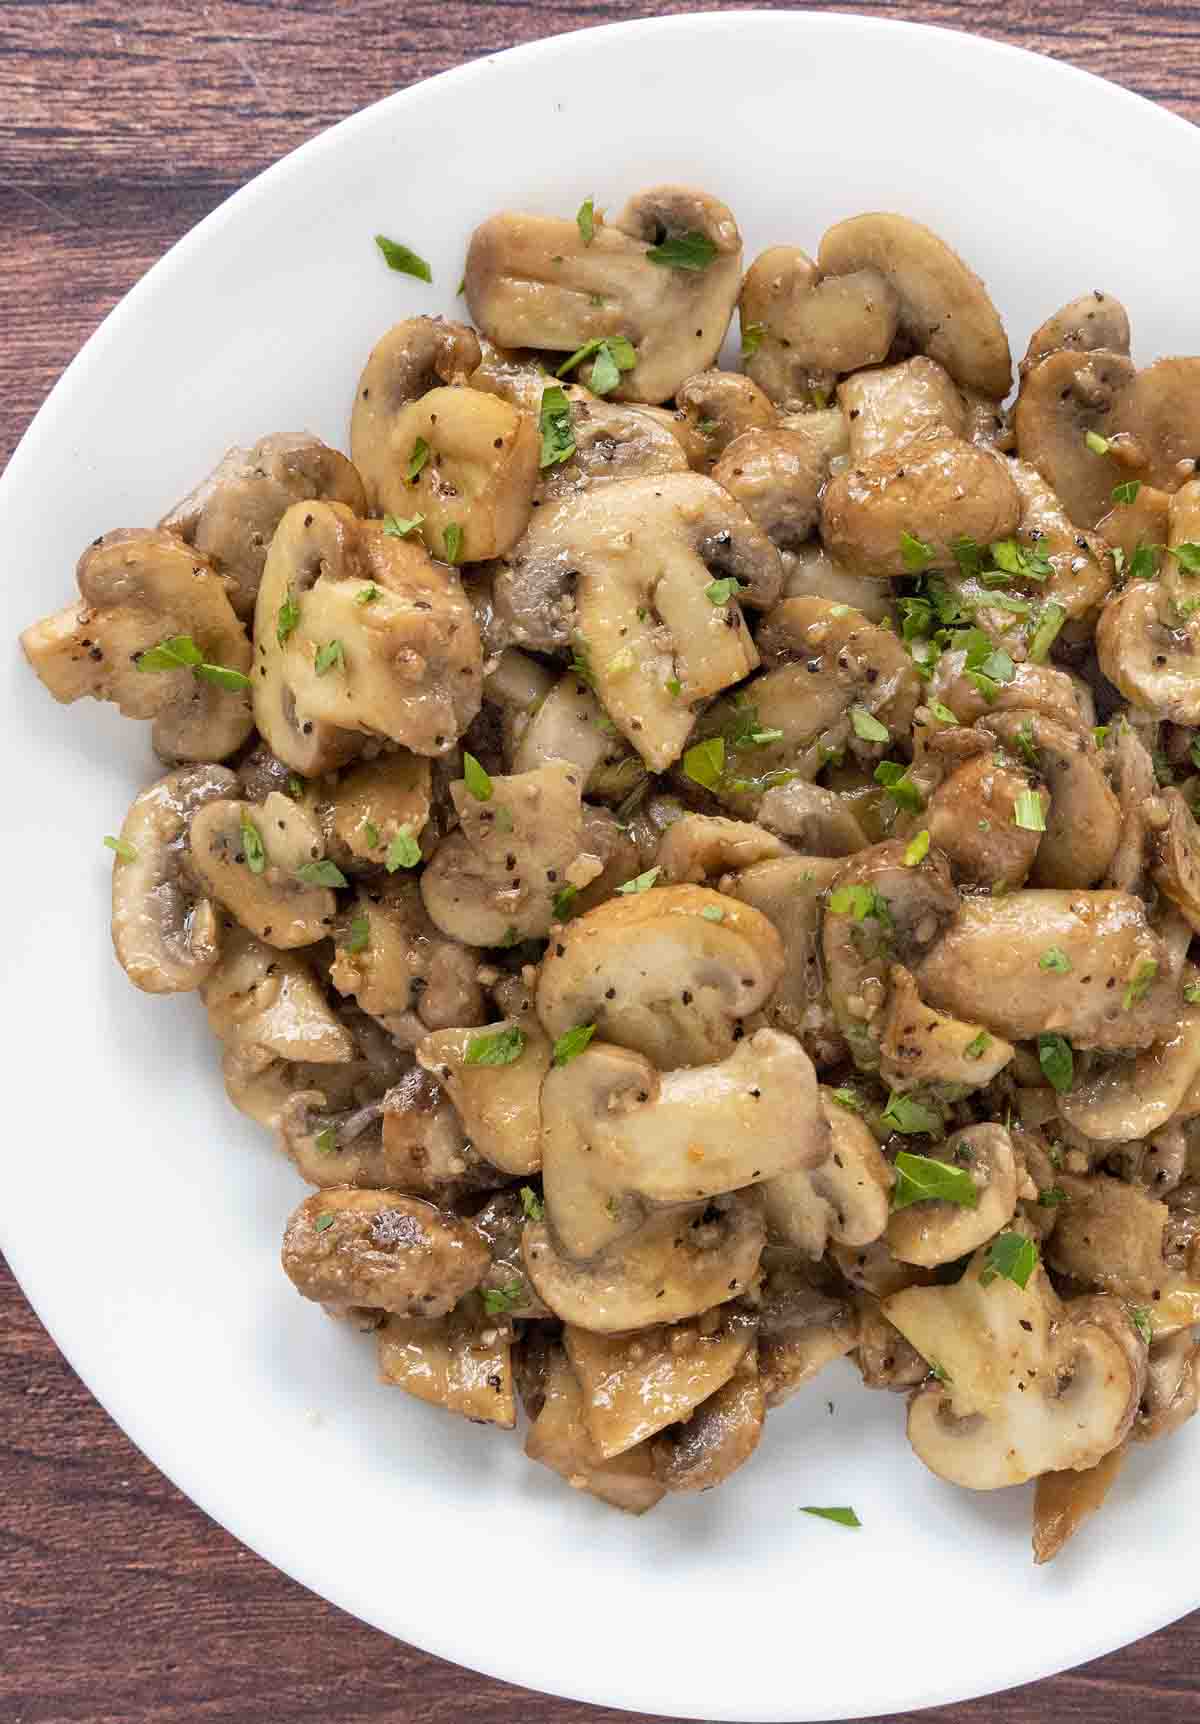 Sauteed mushrooms with garlic butter in a white bowl.